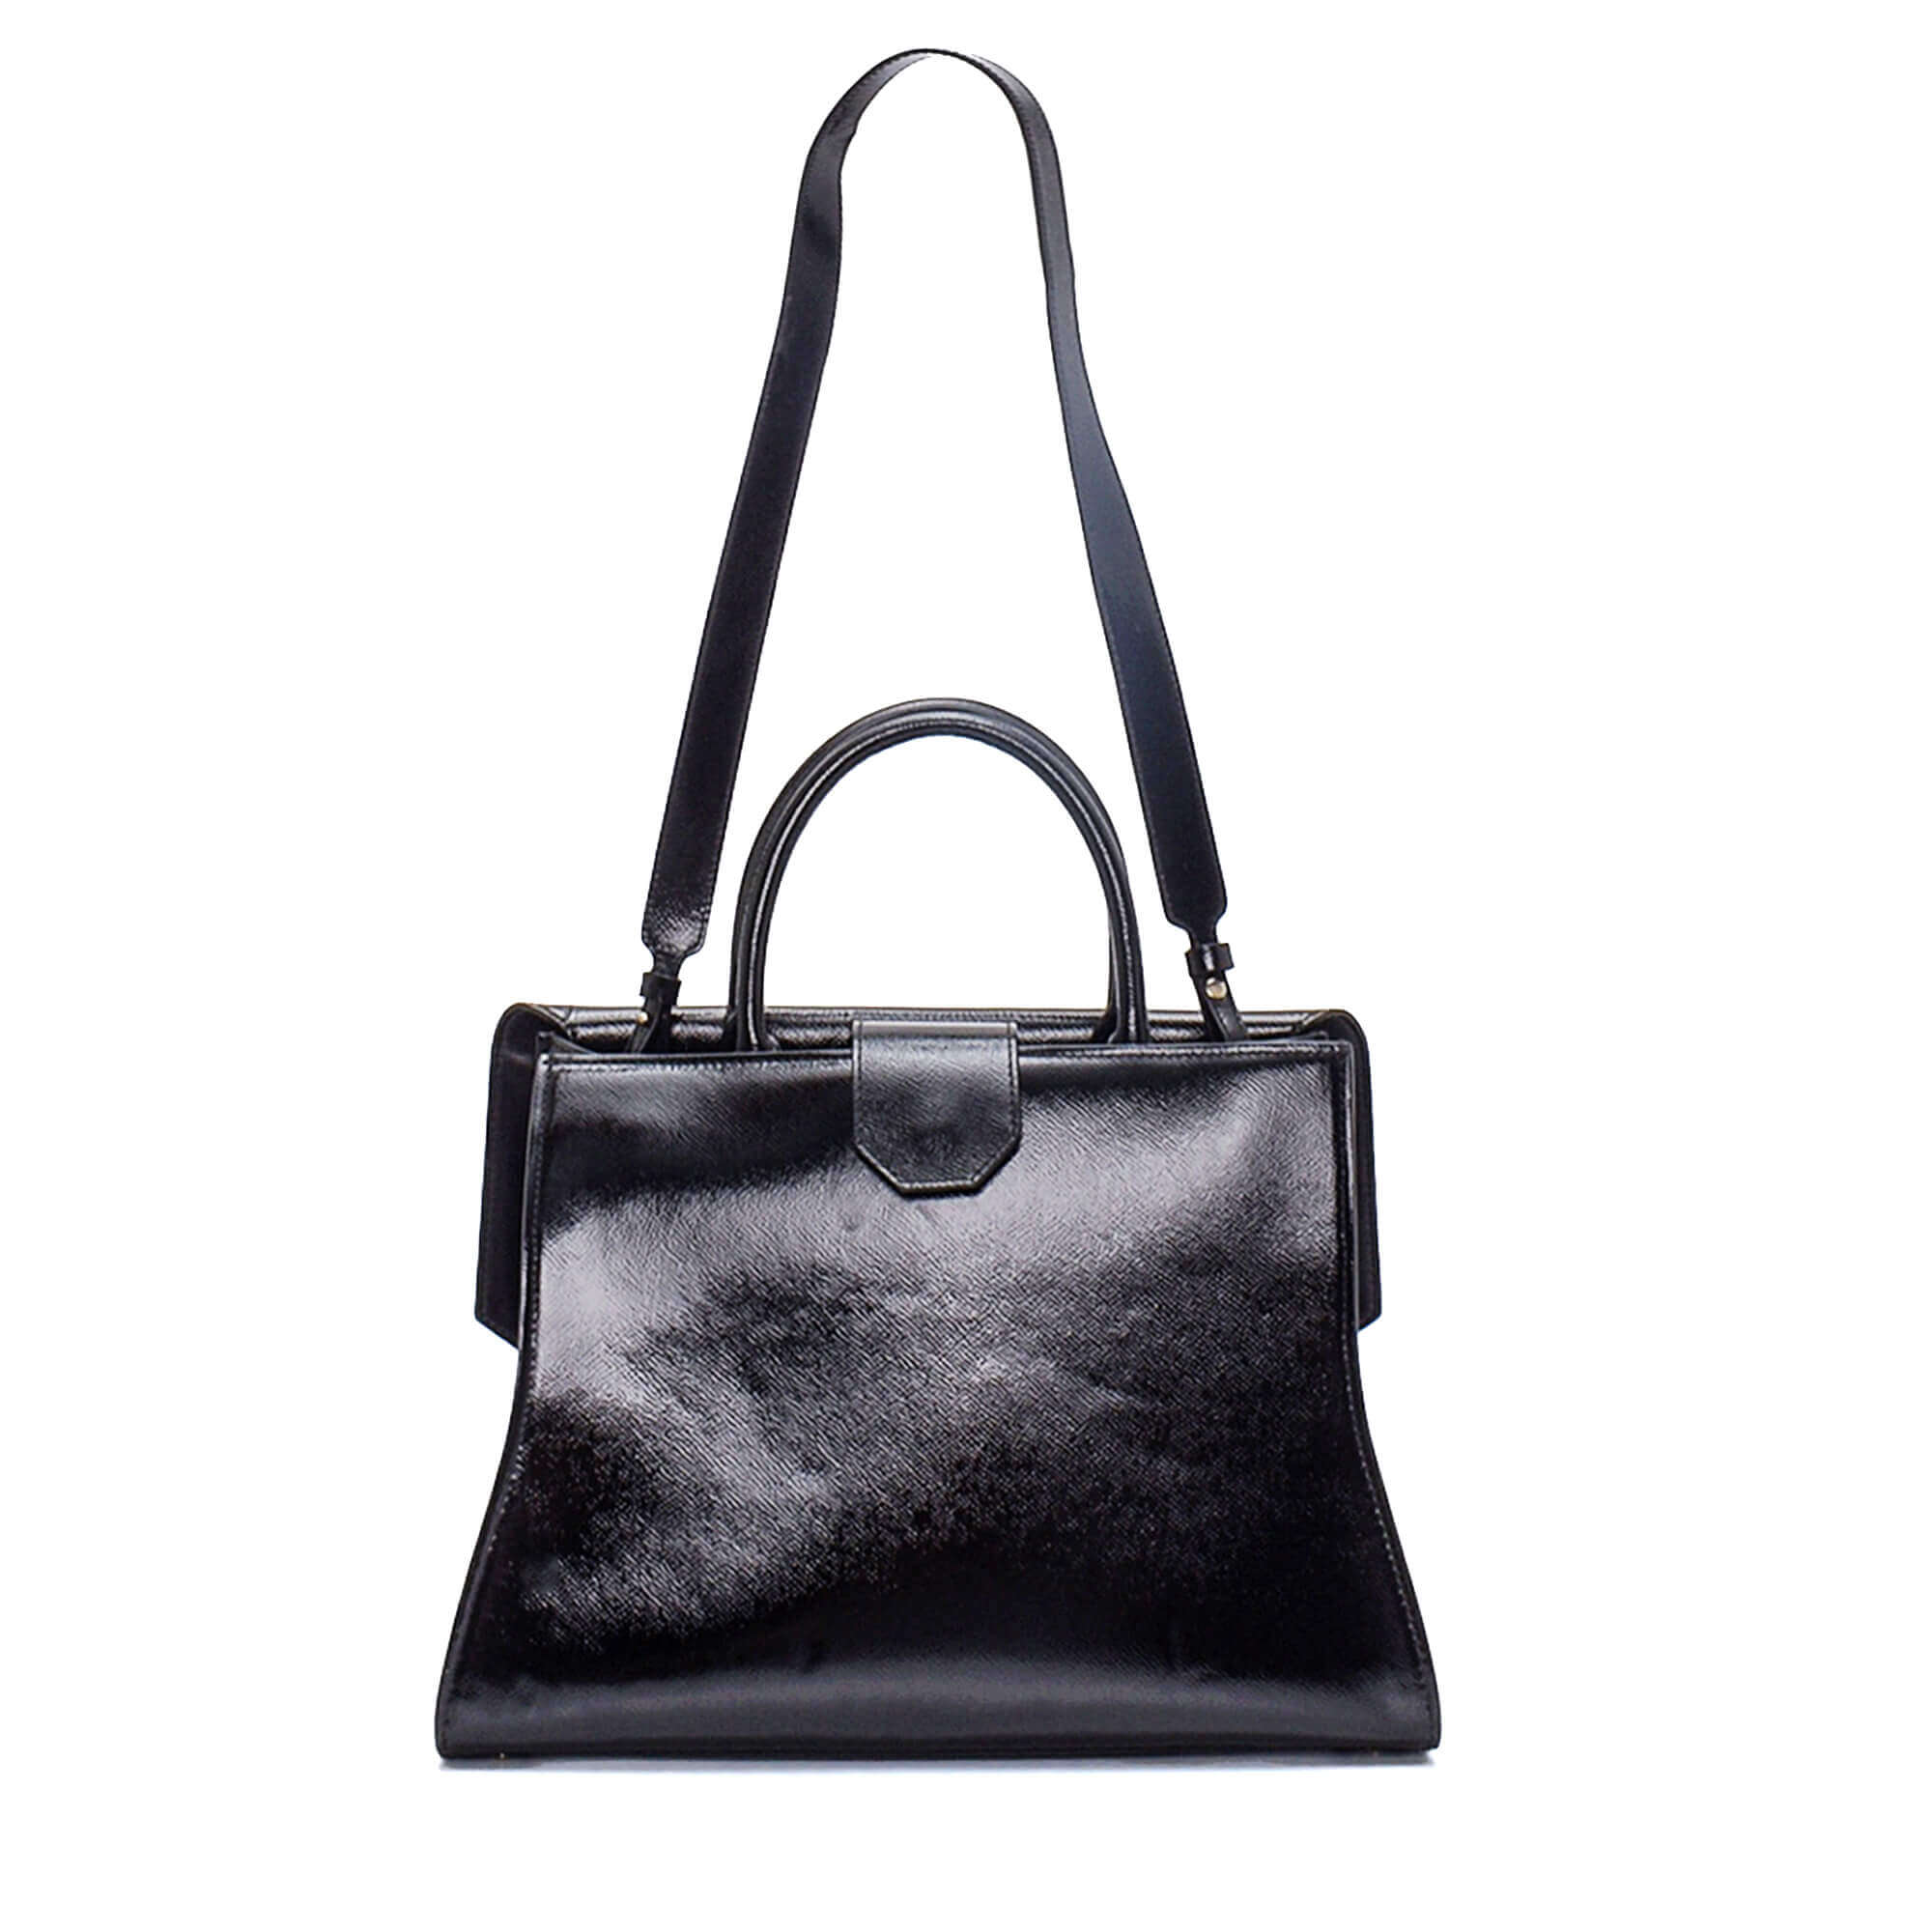 Givenchy - Black Shiny Leather Obsedia Top Handle Satchel Bag